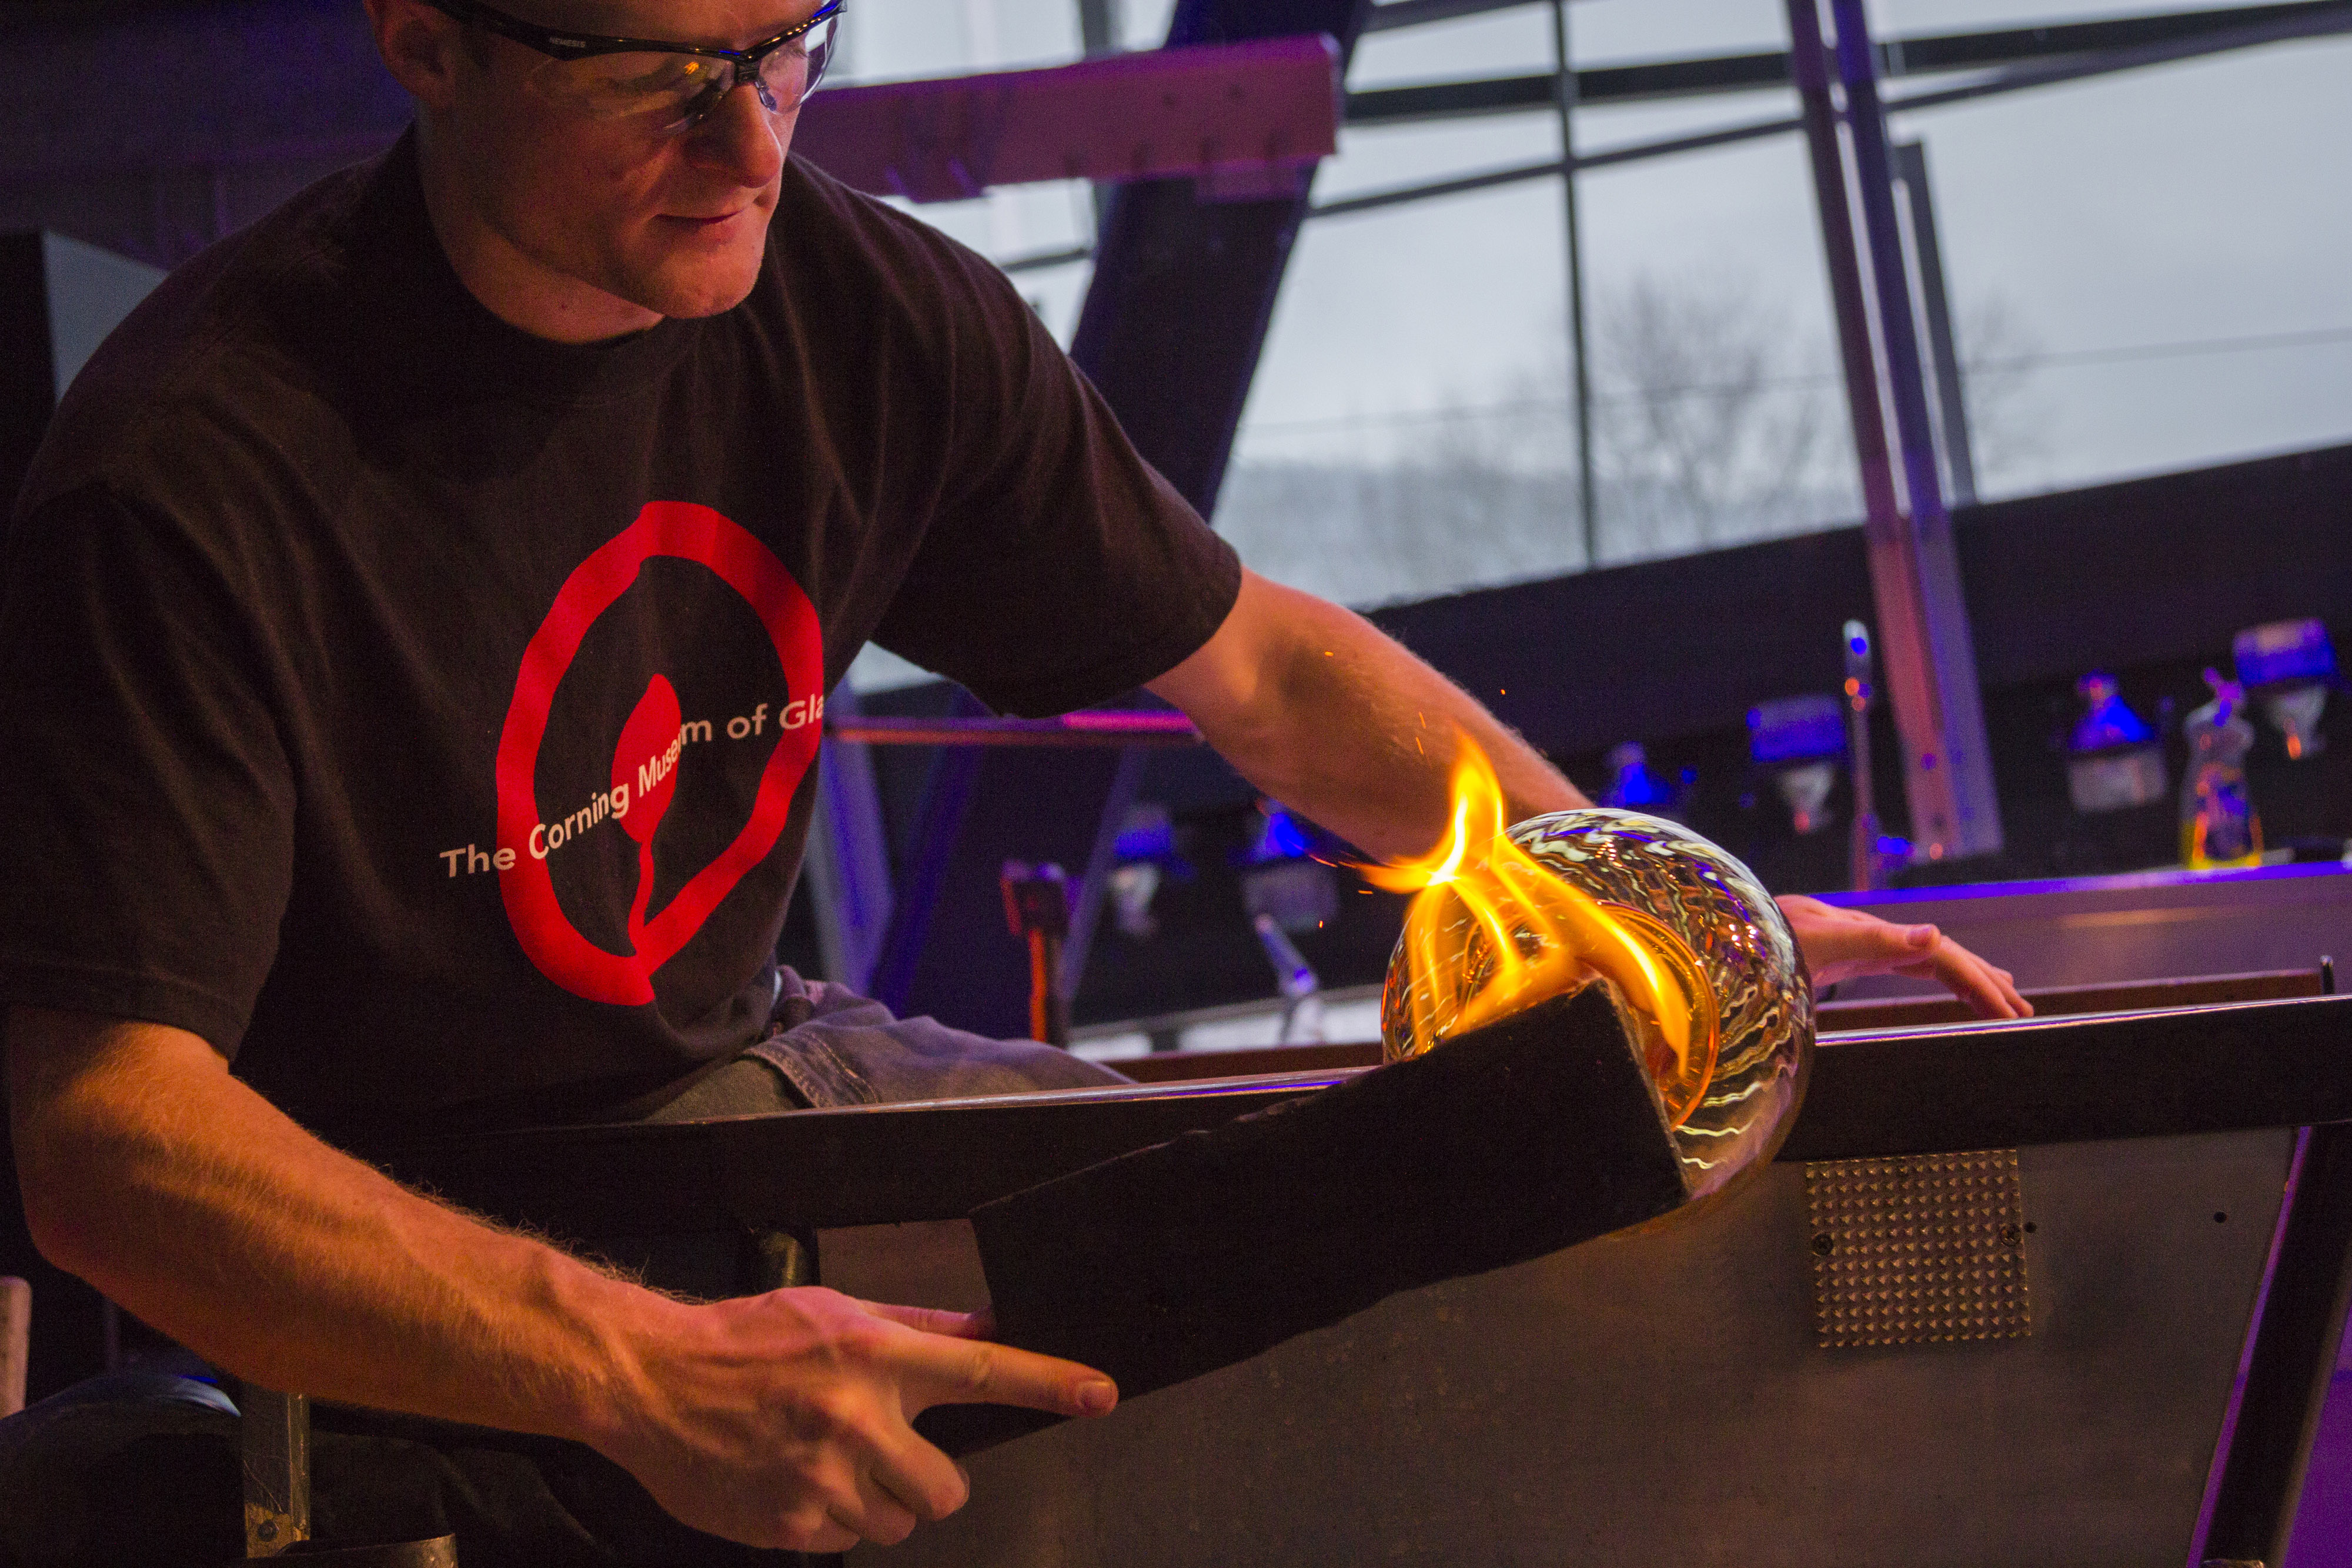 Live Hot Glass Shows at The Corning Museum of Glass